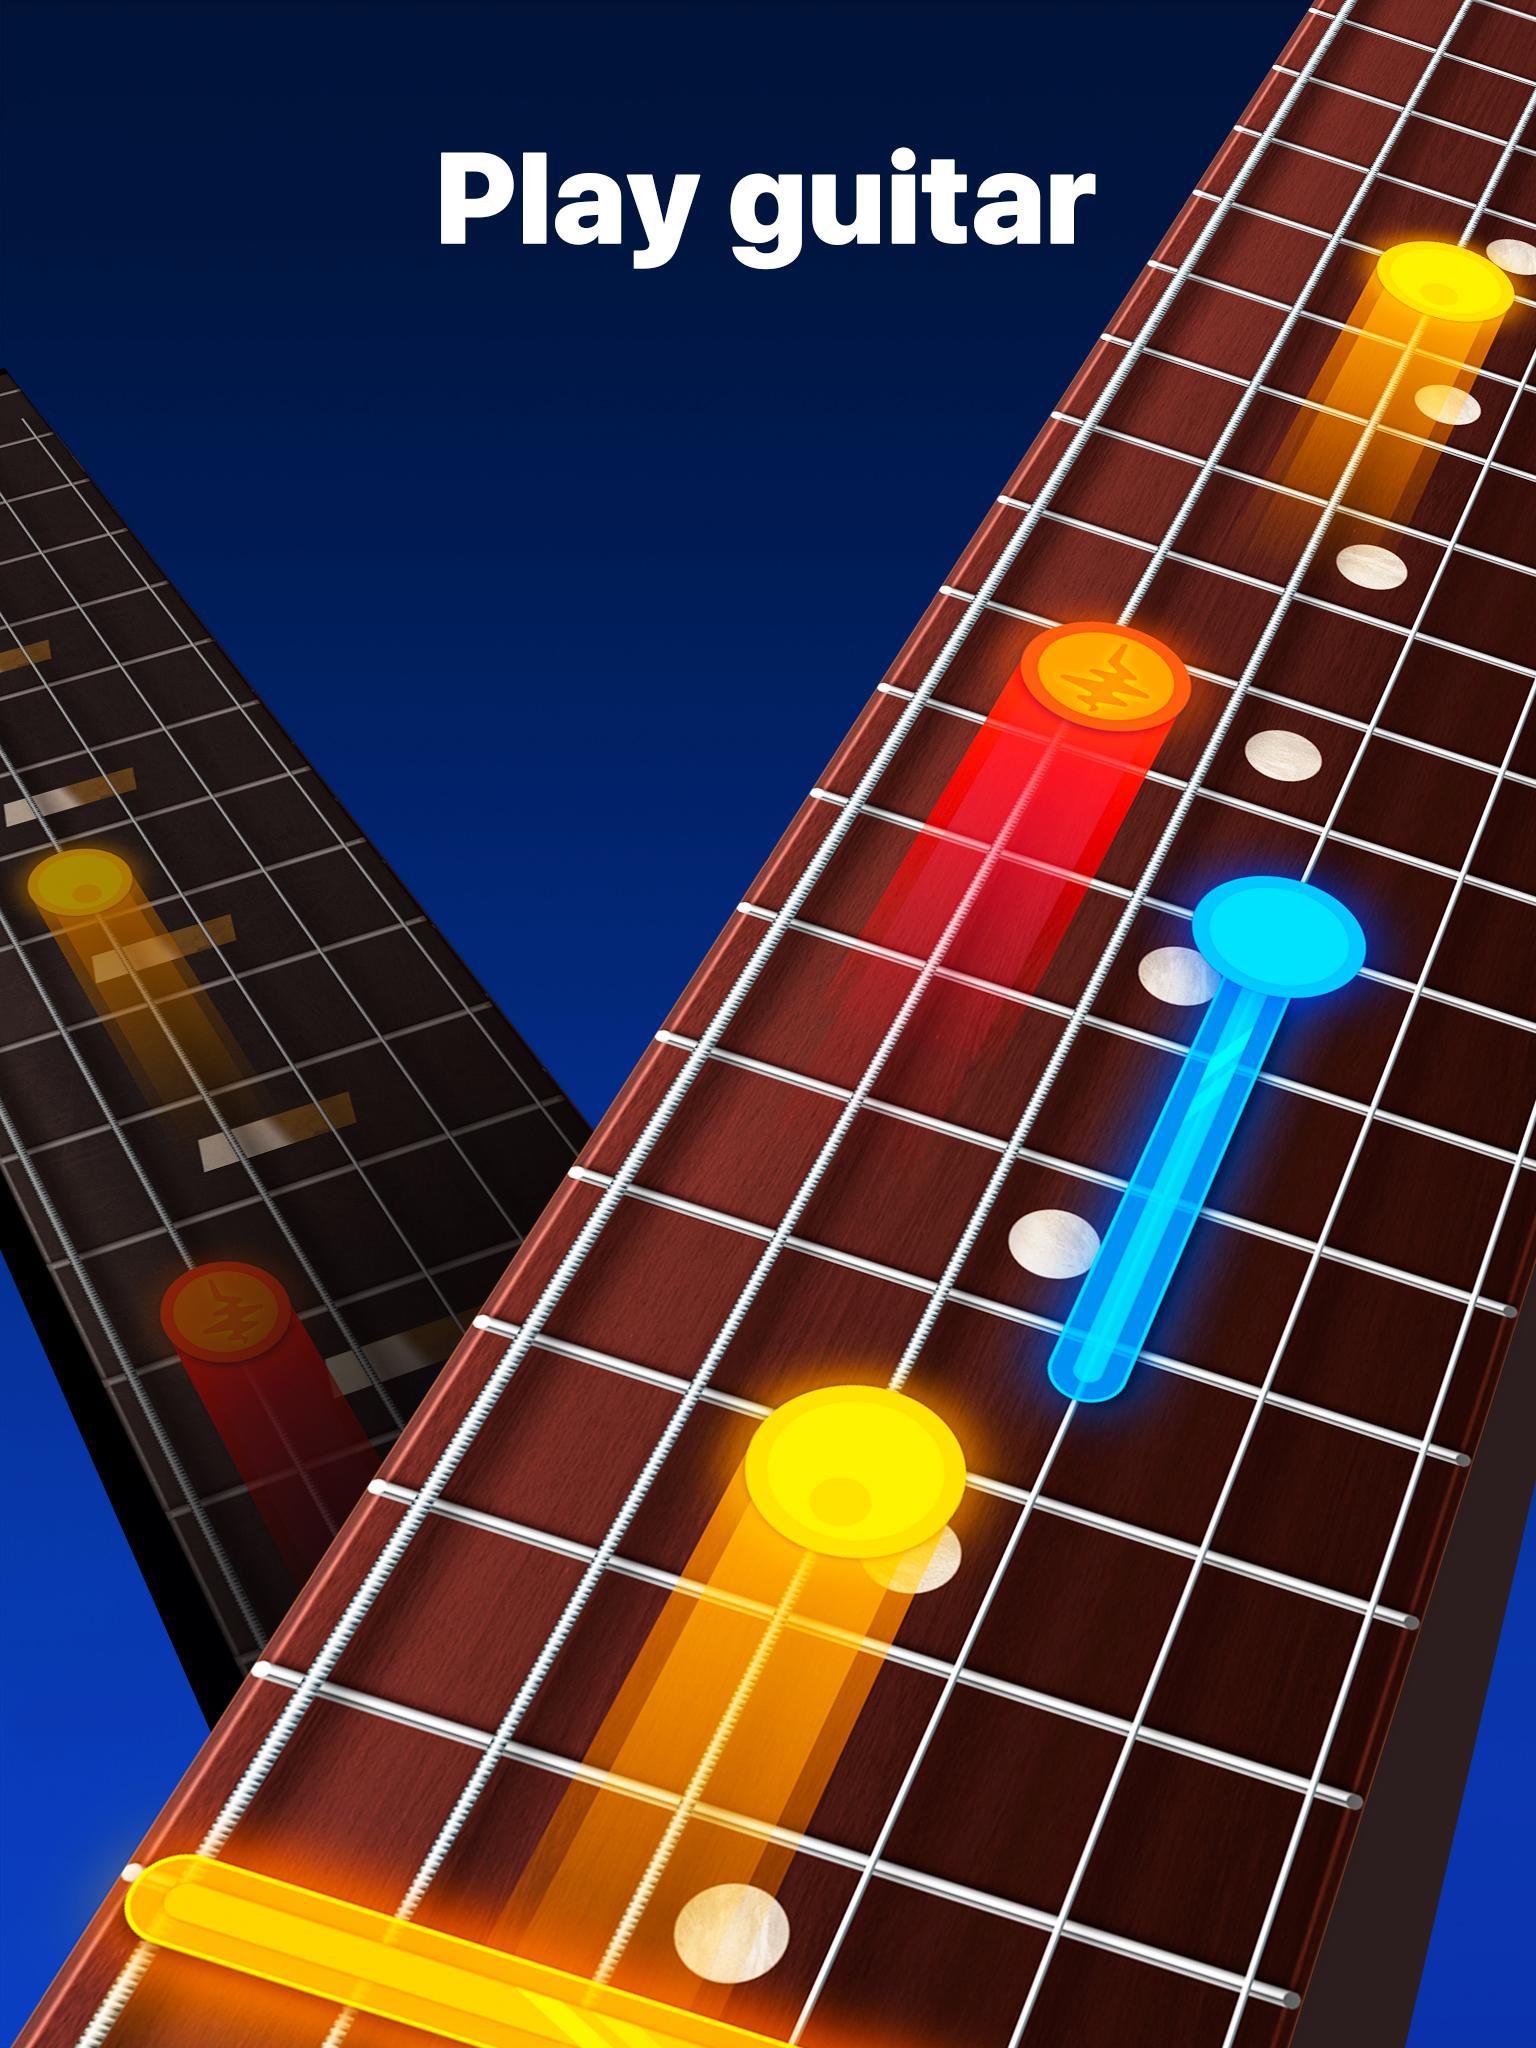 Guitar Play for Android - APK Download